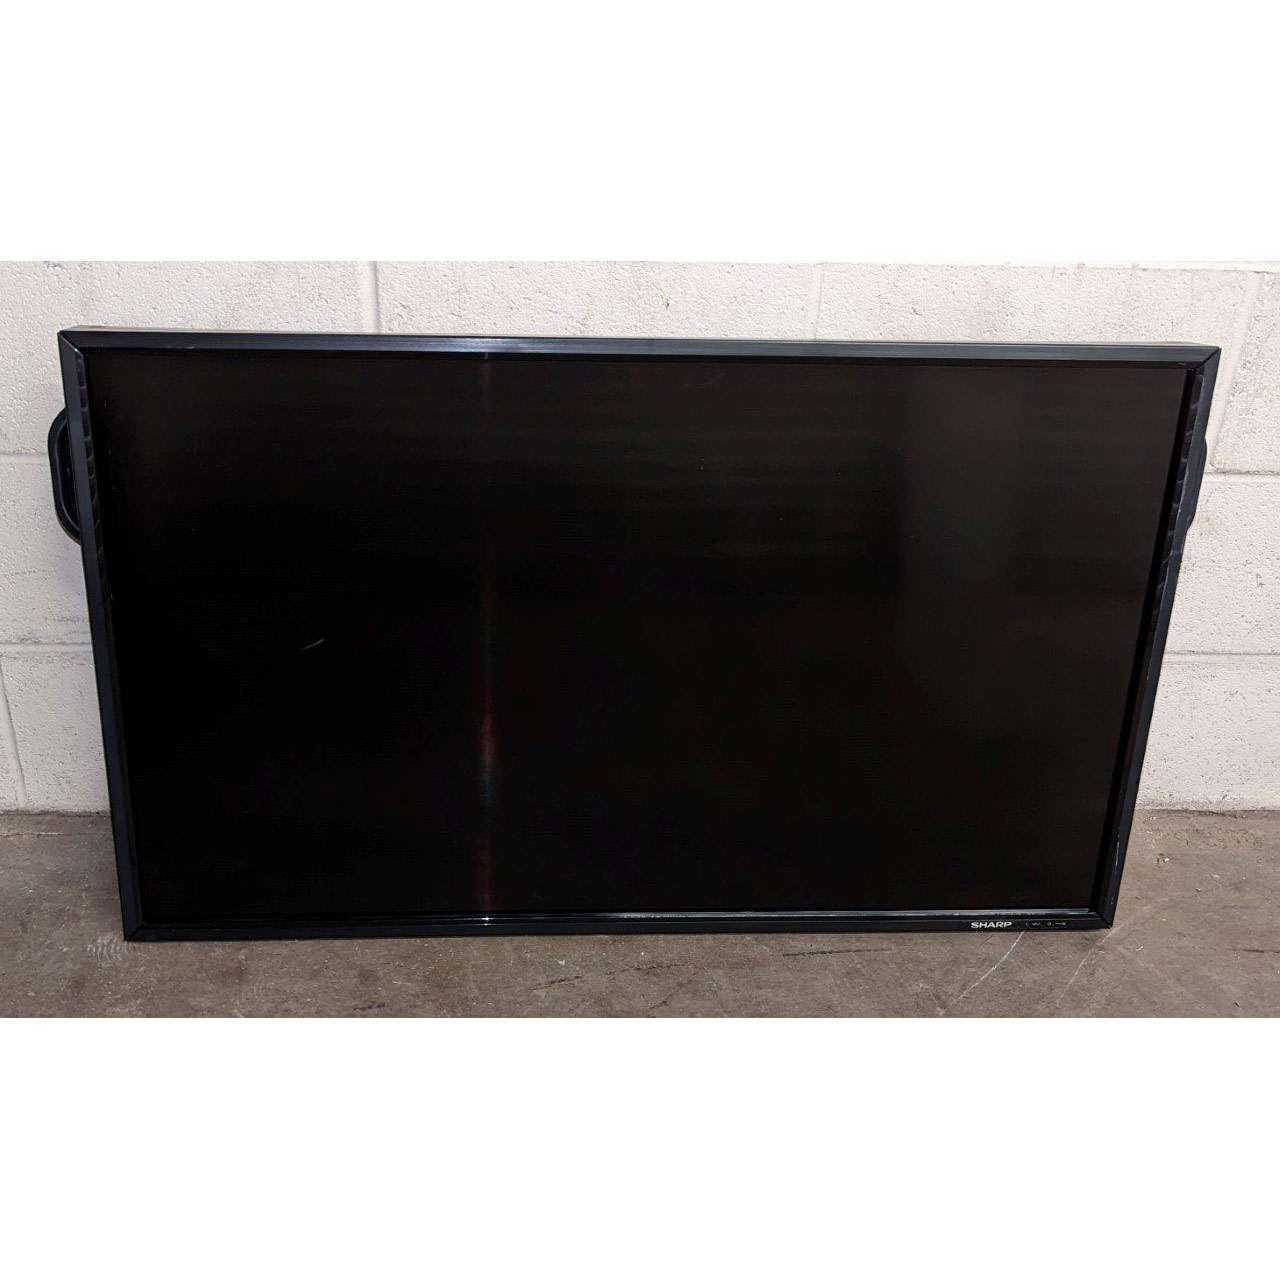 Sharp PN-E421 Full Color Professional LCD Display Monitor (PNE421) for Digital Signage